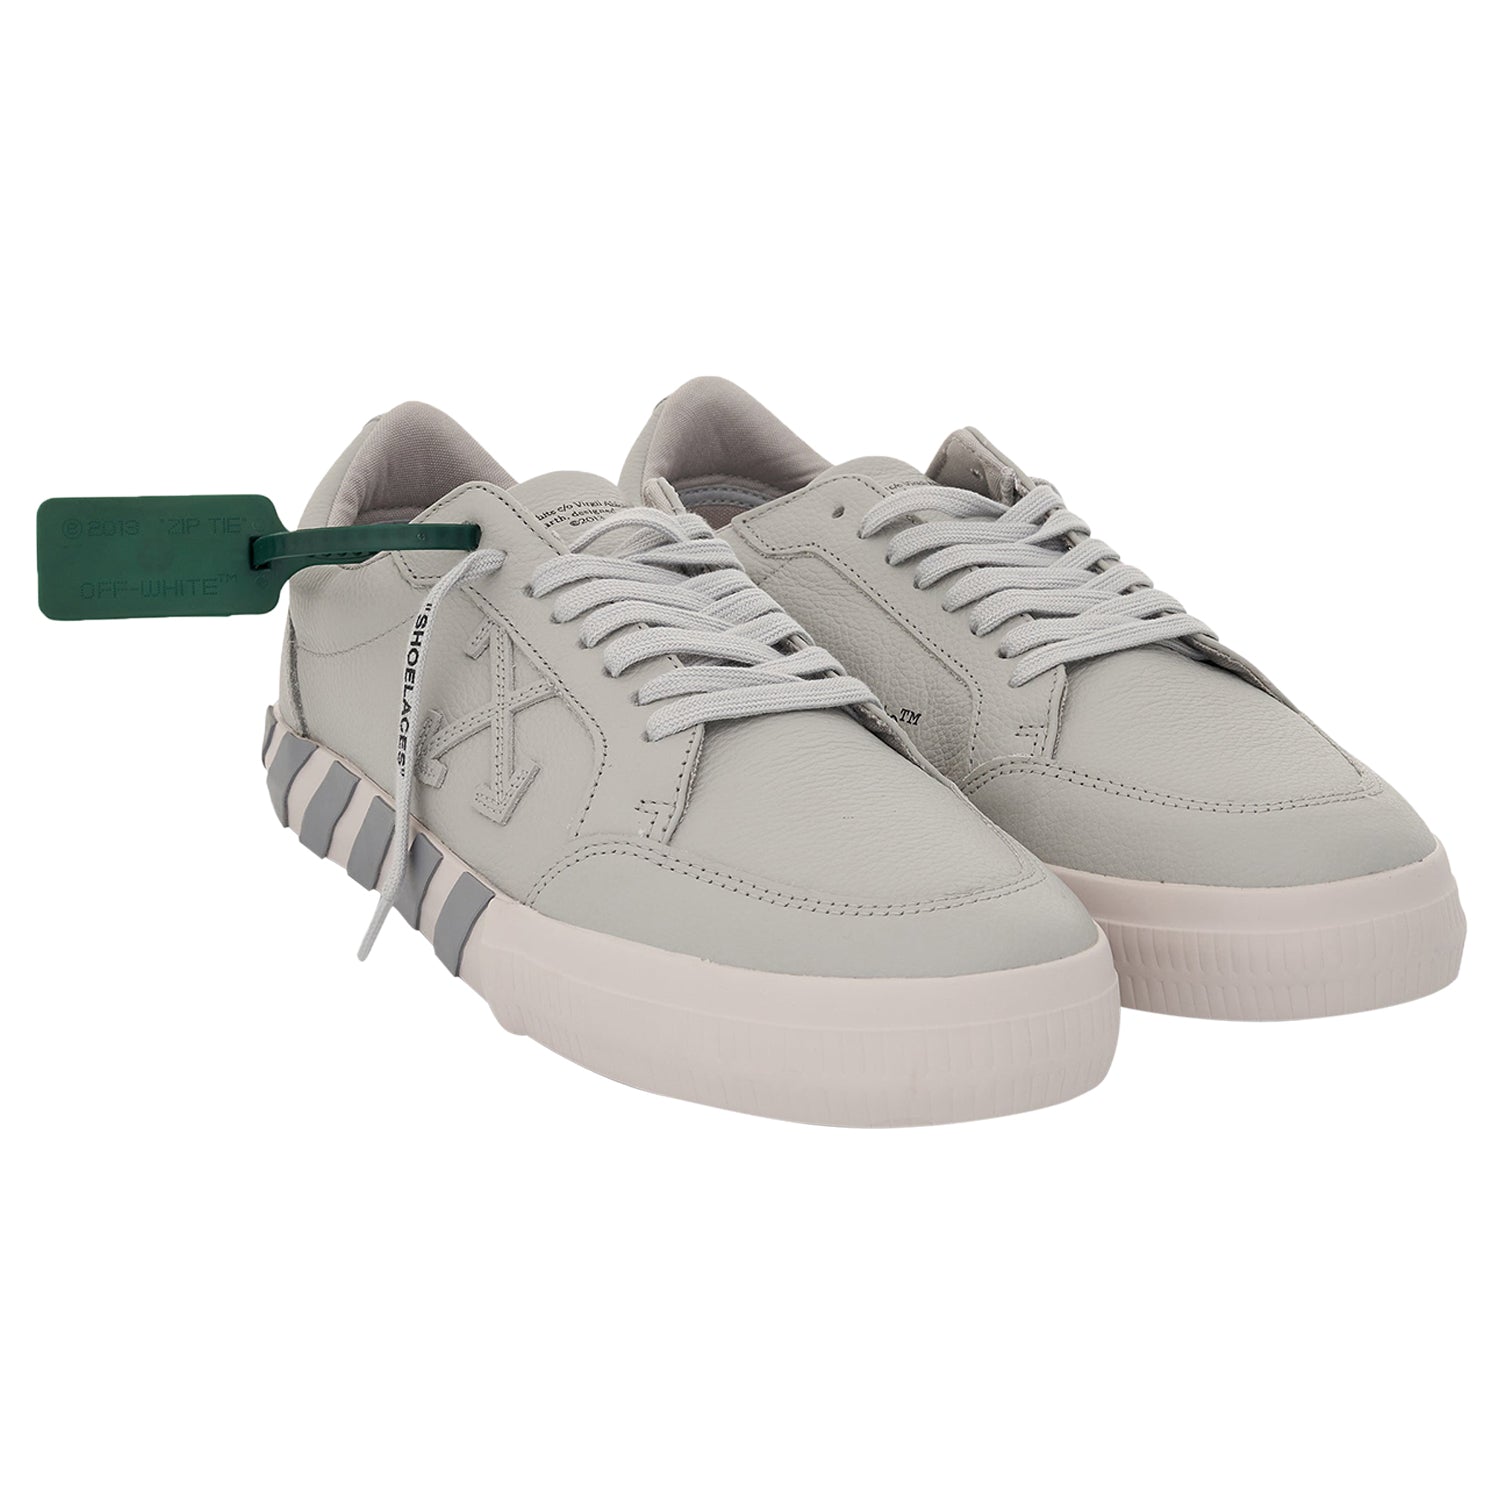 Off-white Low Vulcanized Calf Leather Mens Style : Omia085c99lea0010